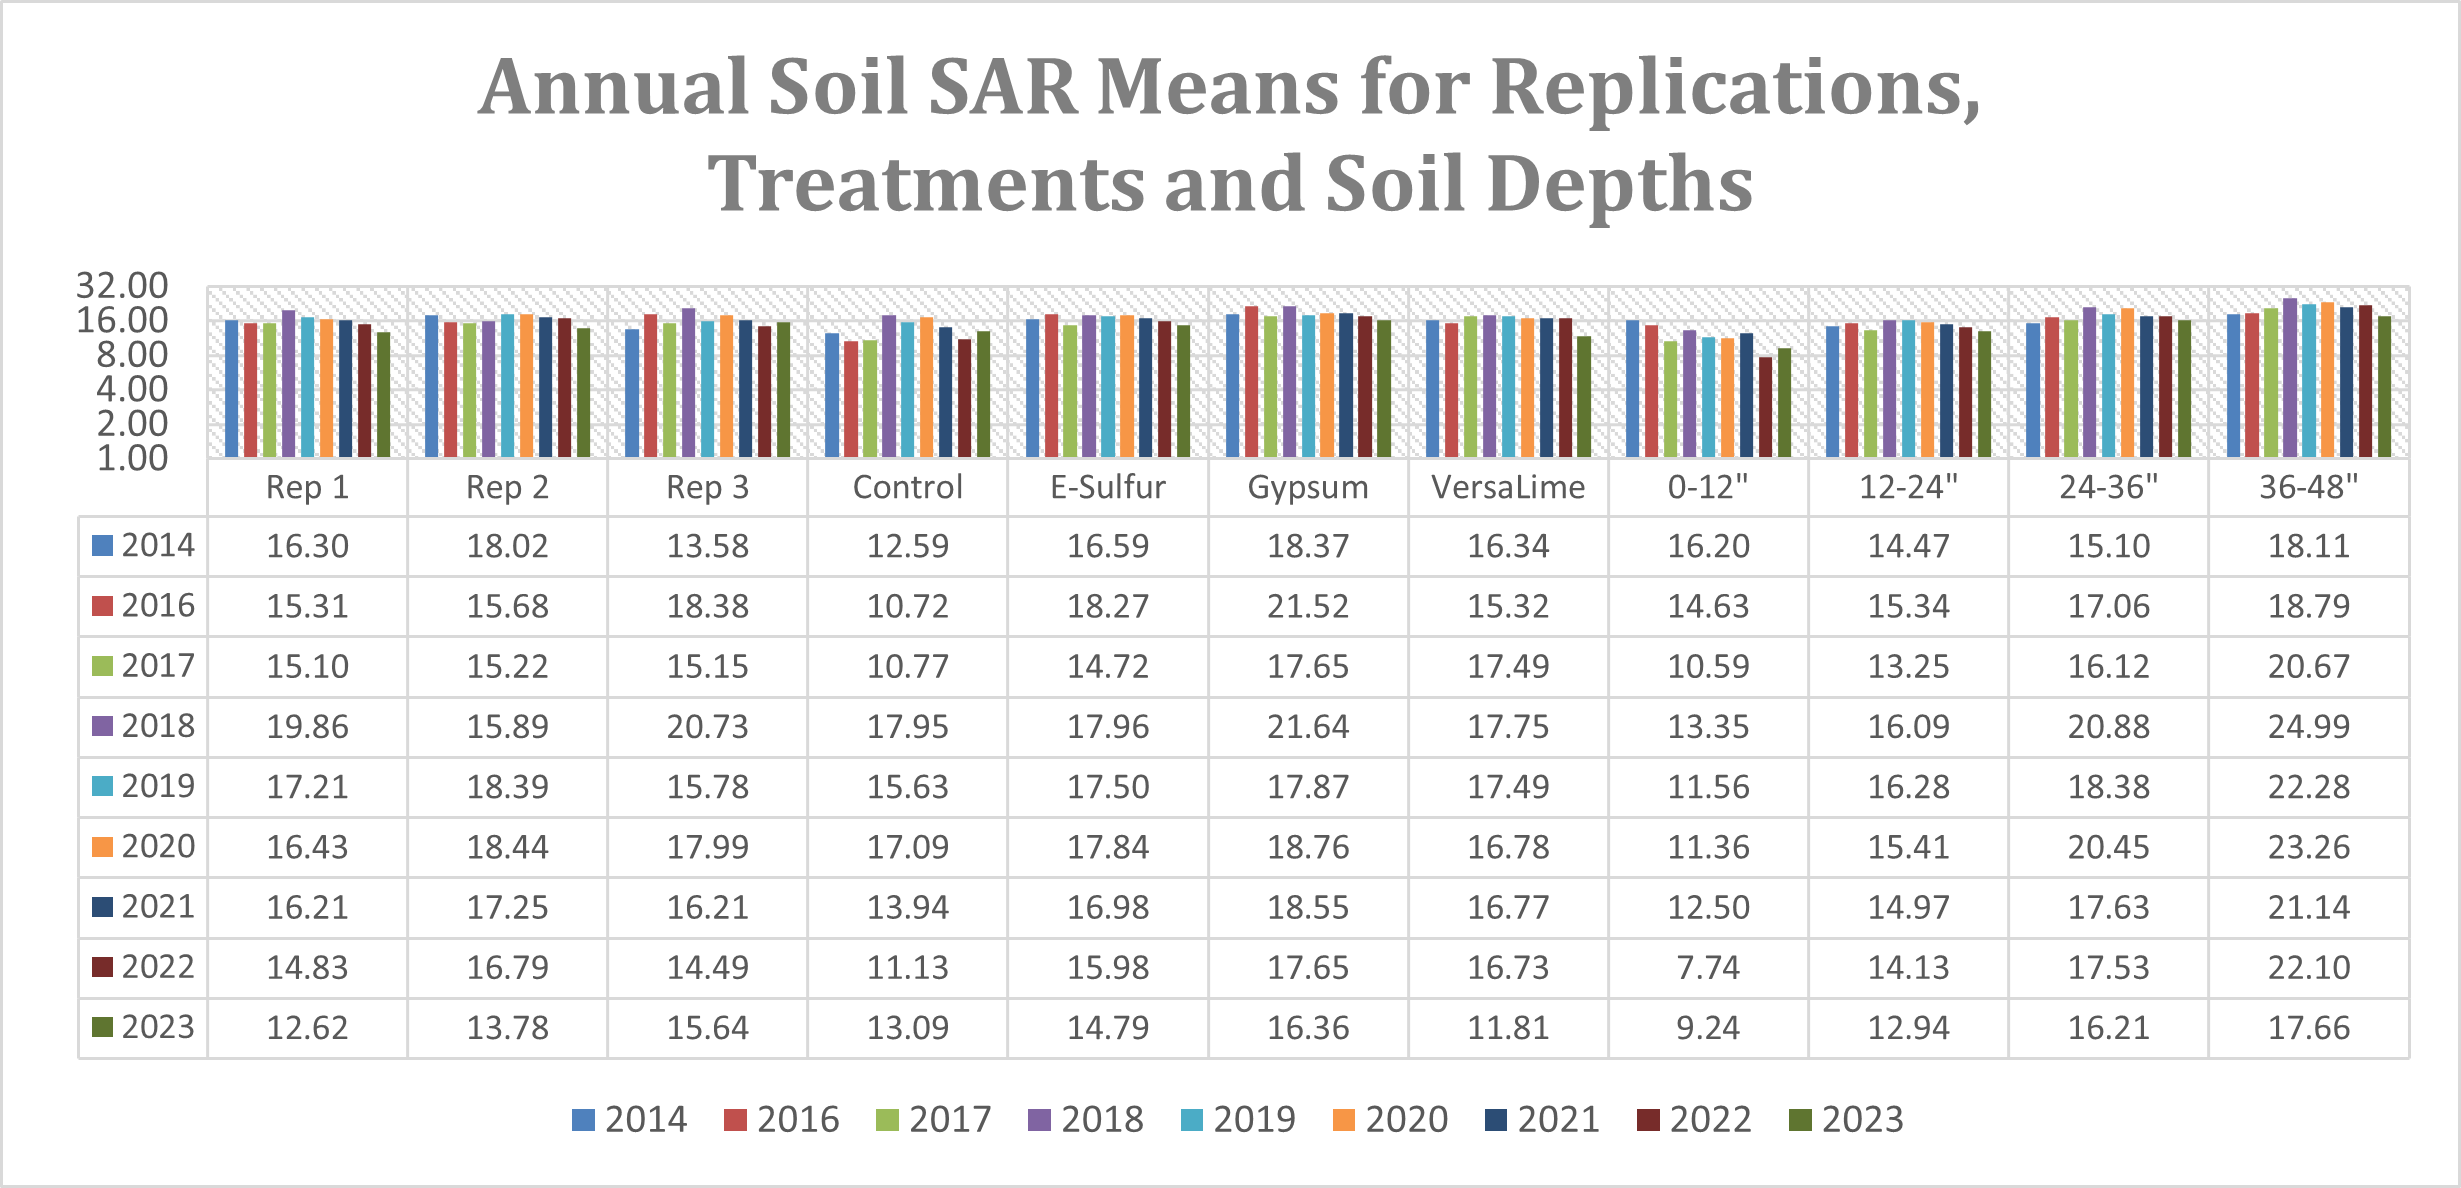 Annual soil SAR means for replications, treatments and soil depths 2023